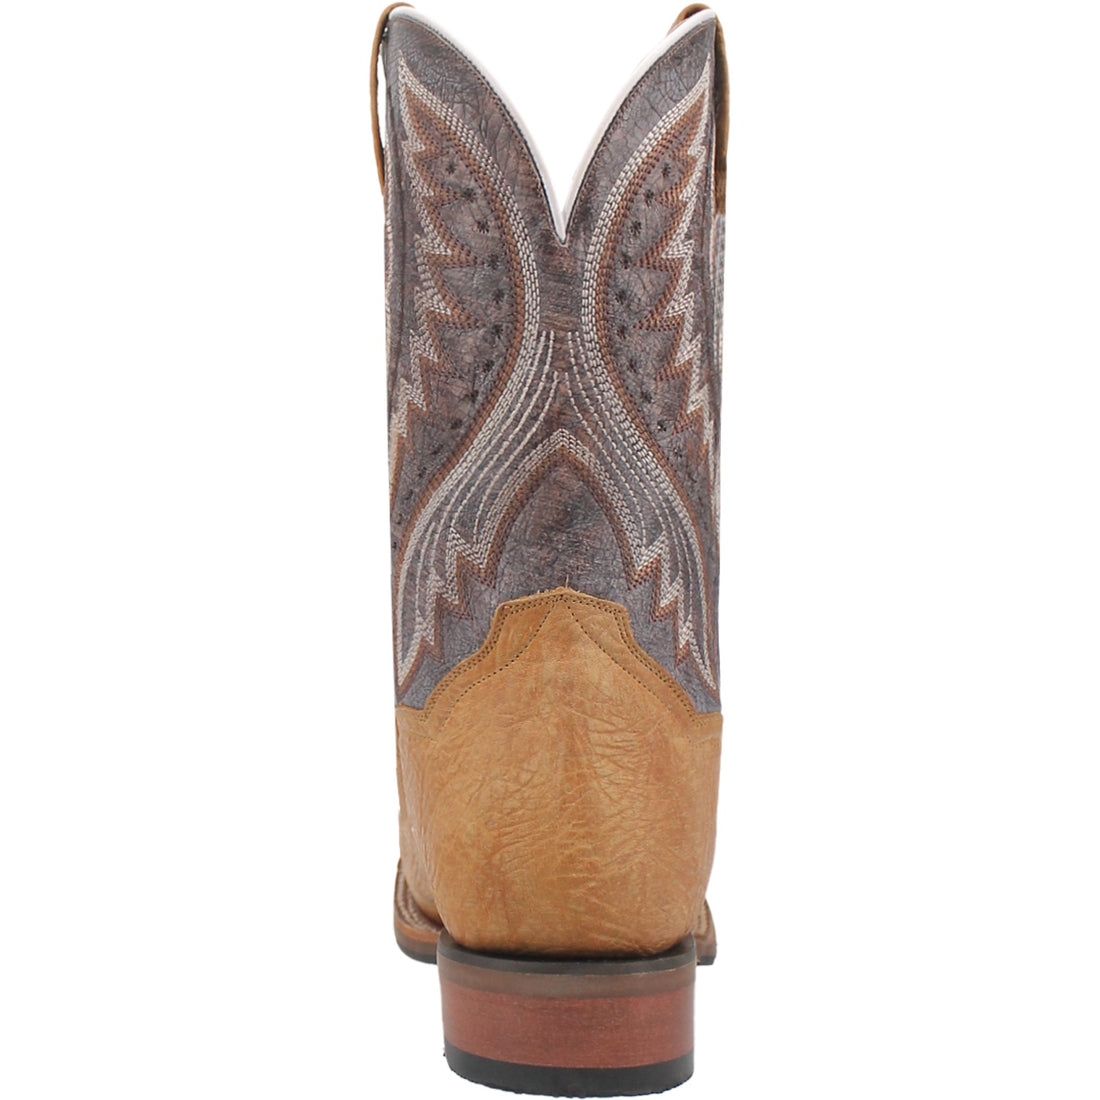 DUGAN BISON LEATHER BOOT Preview #4